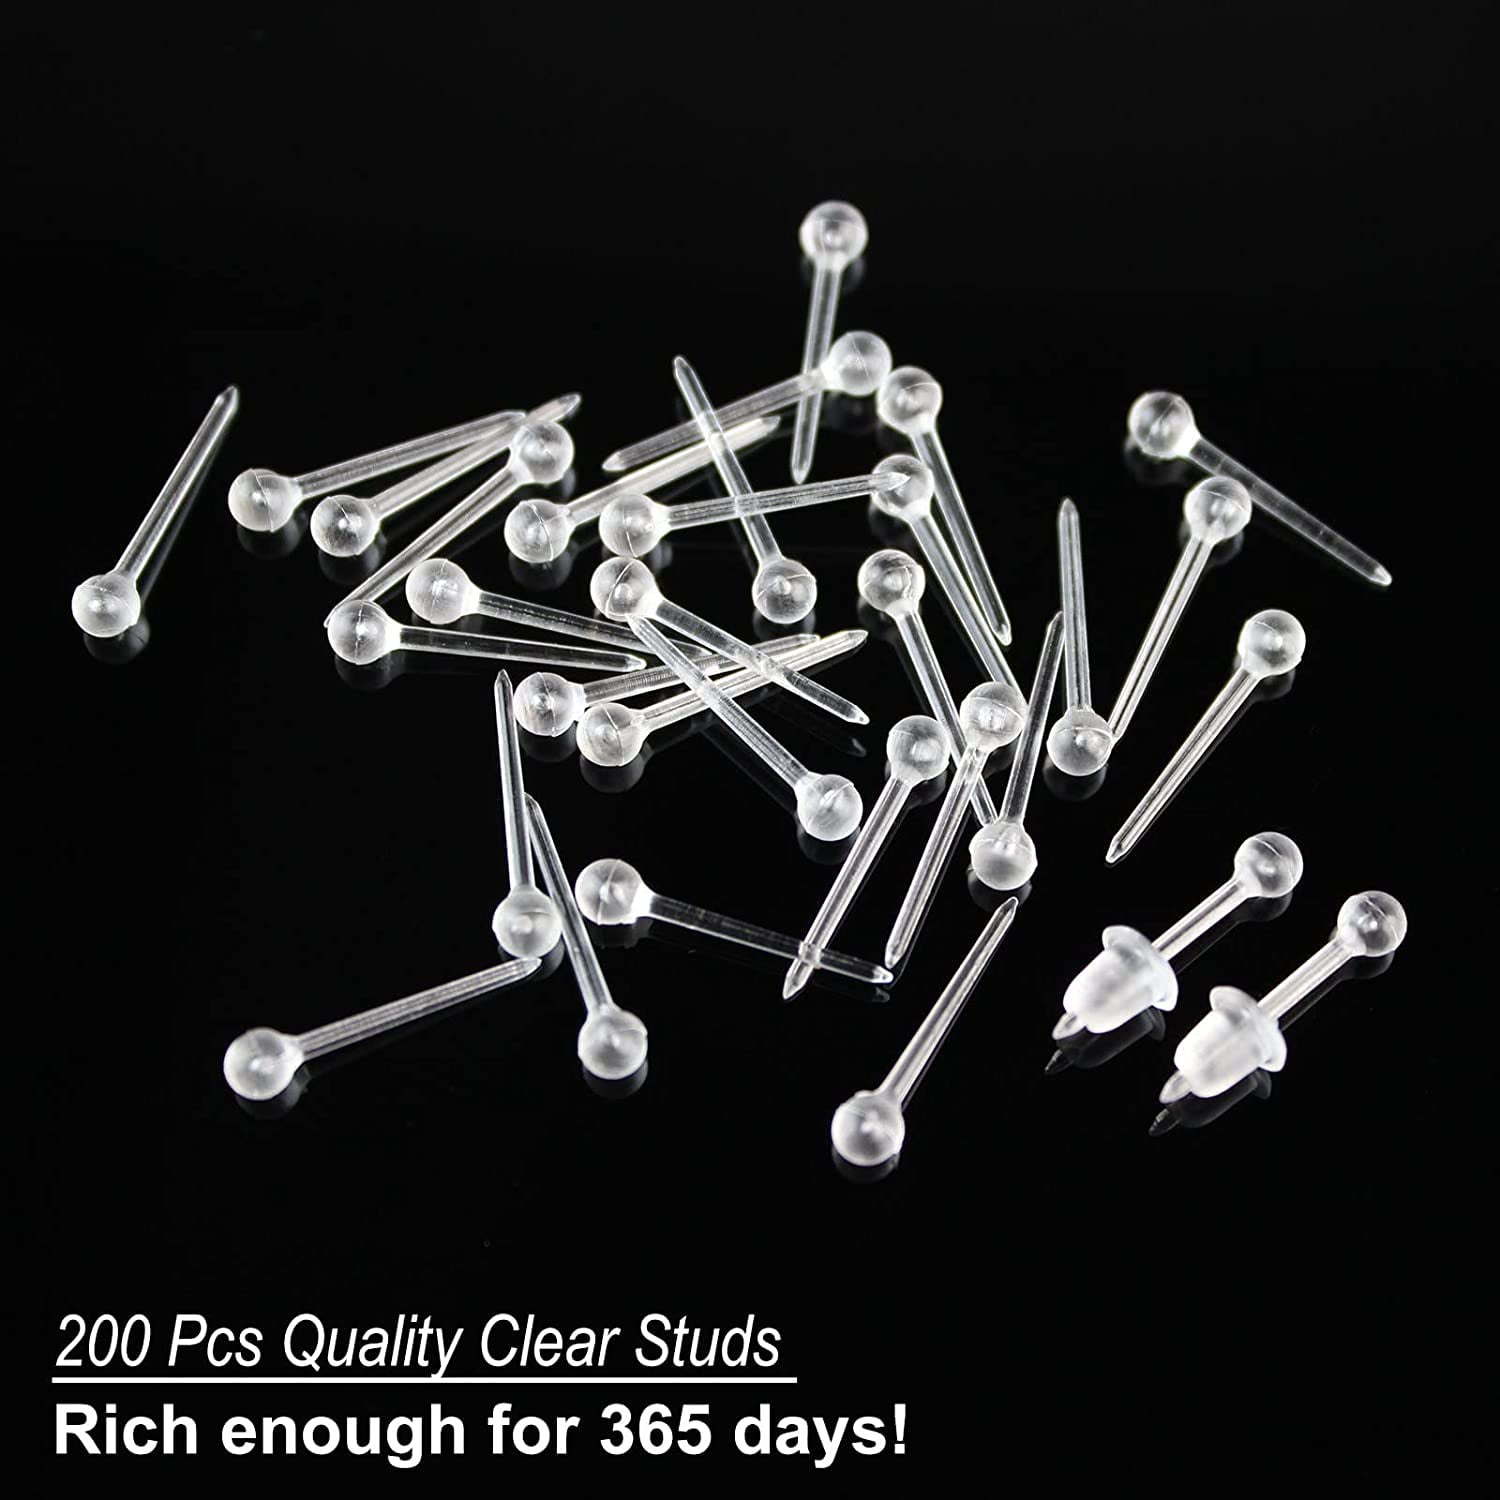 Clear Earrings For Sports, 400Pcs 18g Plastic Earrings For Sensitive Ears,  Clear Stud Earrings for Work with Solid Plastic Posts and Soft Rubber  Earring Backs in 2 Organizer Box 